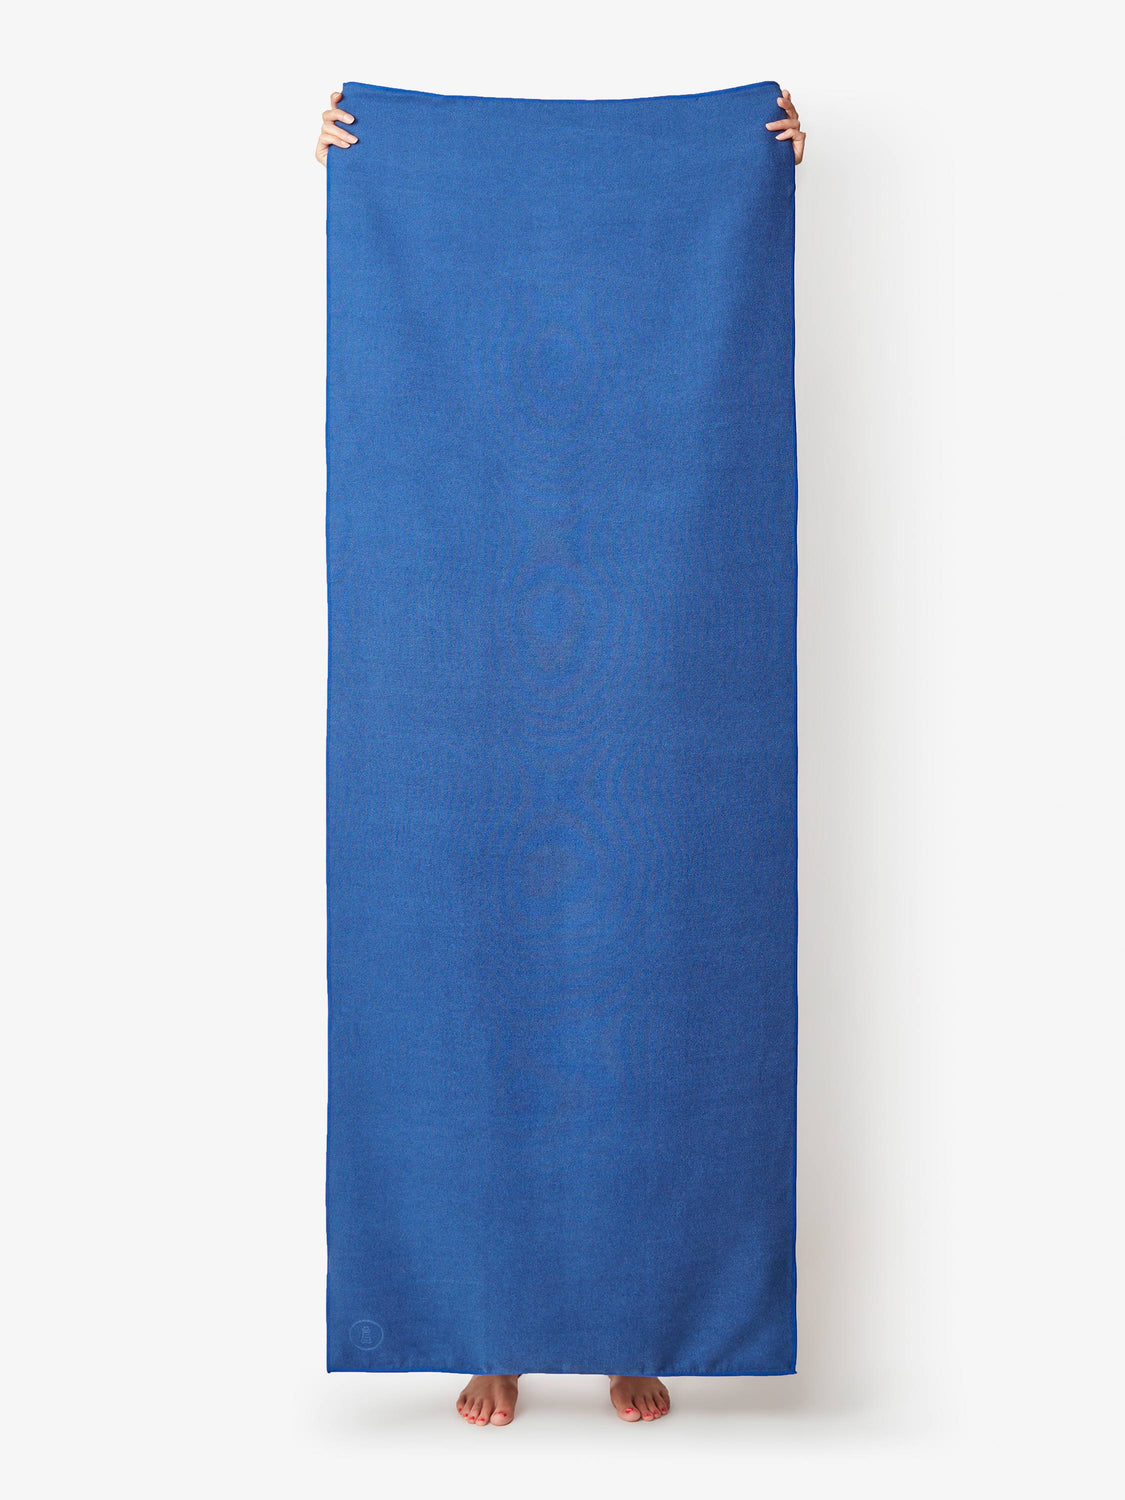 A sapphire blue yoga mat towel being held up by a person.